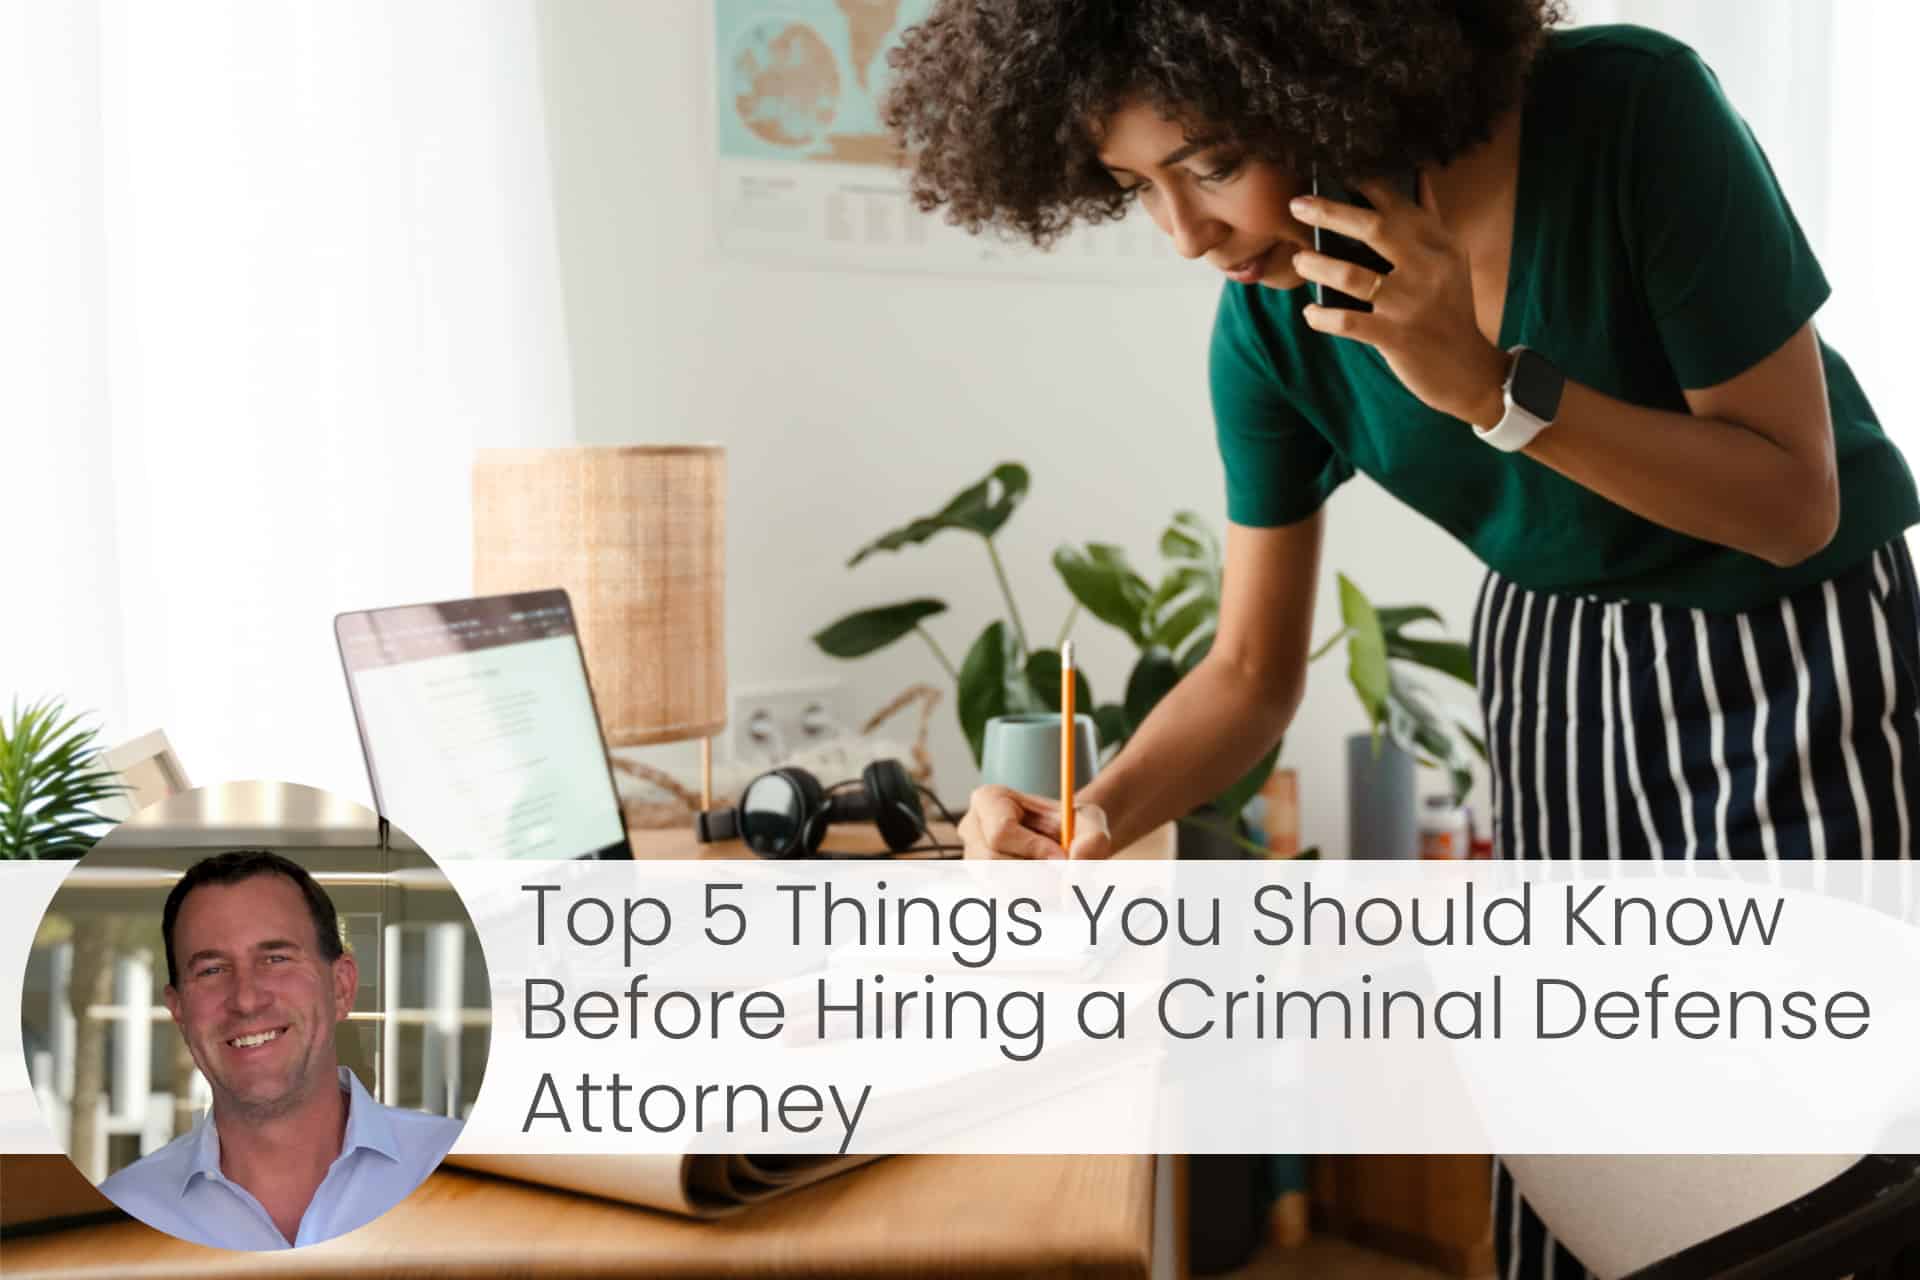 Things You Should Know Before Hiring a Criminal Defense Attorney, criminal defense attorney